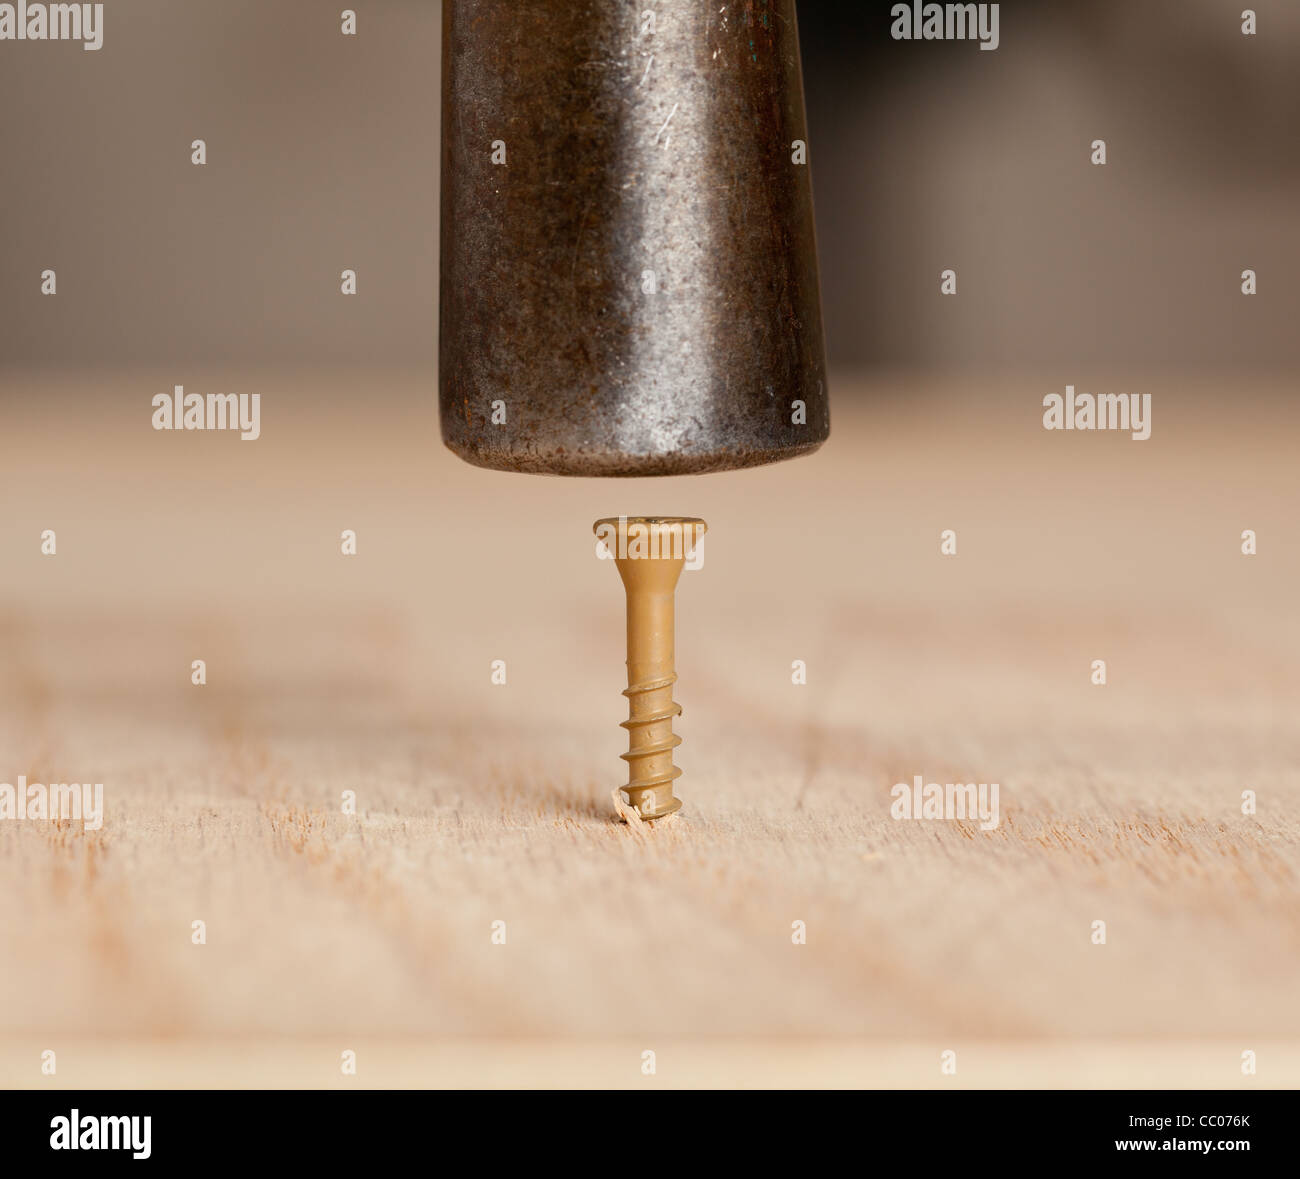 Brown screw being driven into wood by hammer head Stock Photo